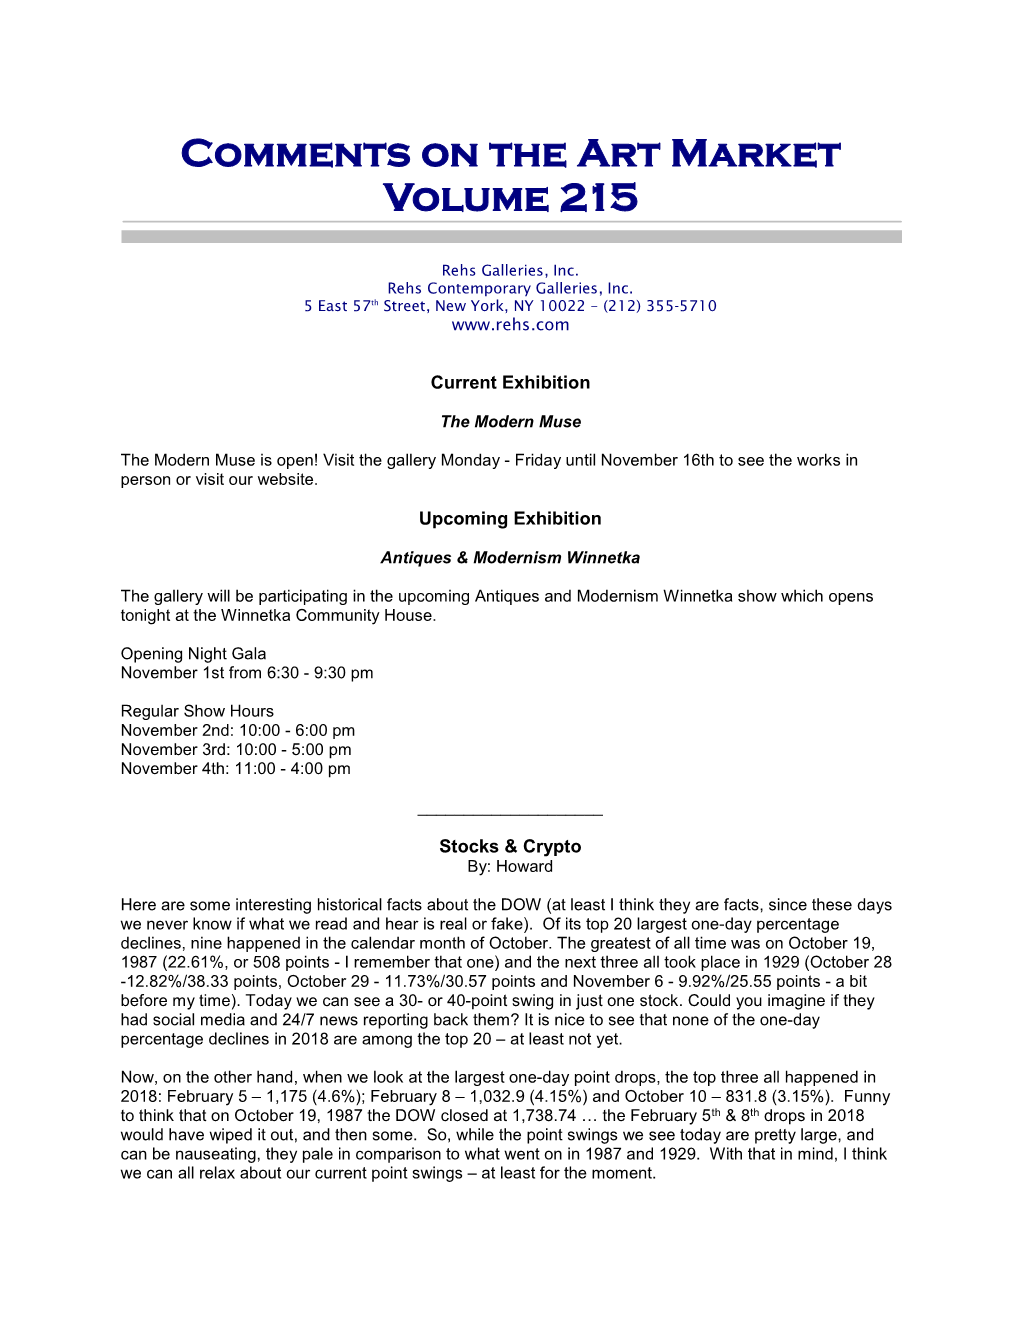 Comments on the Art Market Volume 215